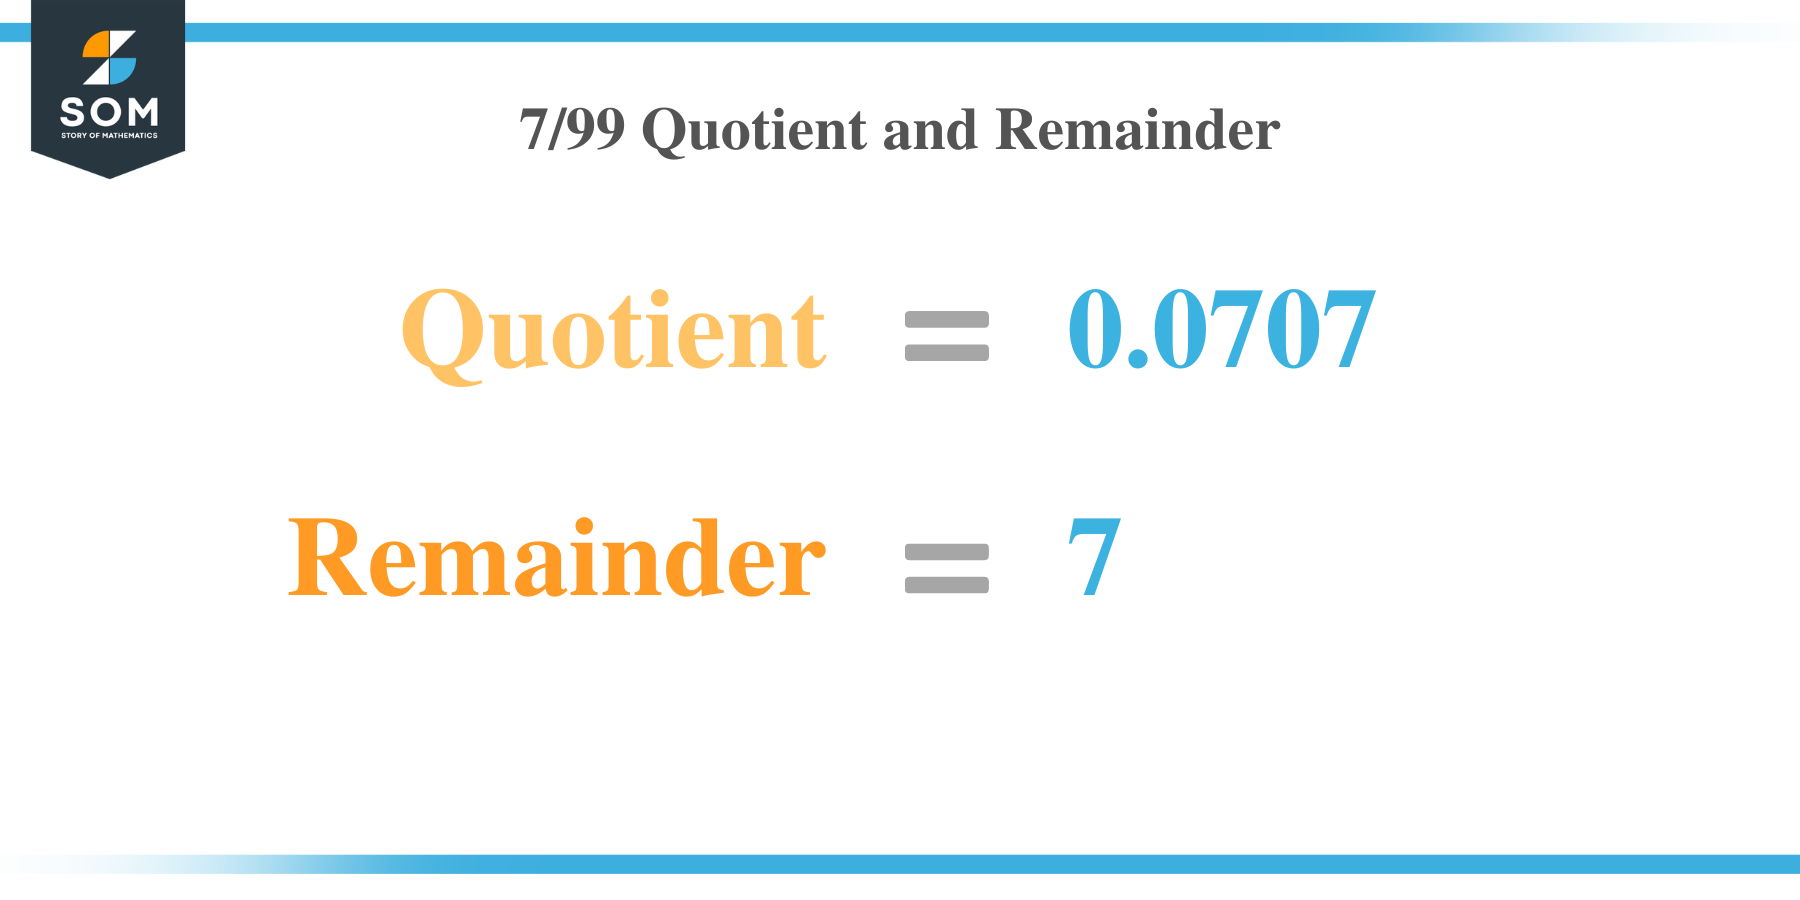 13 by 40 Quotient and Remainder